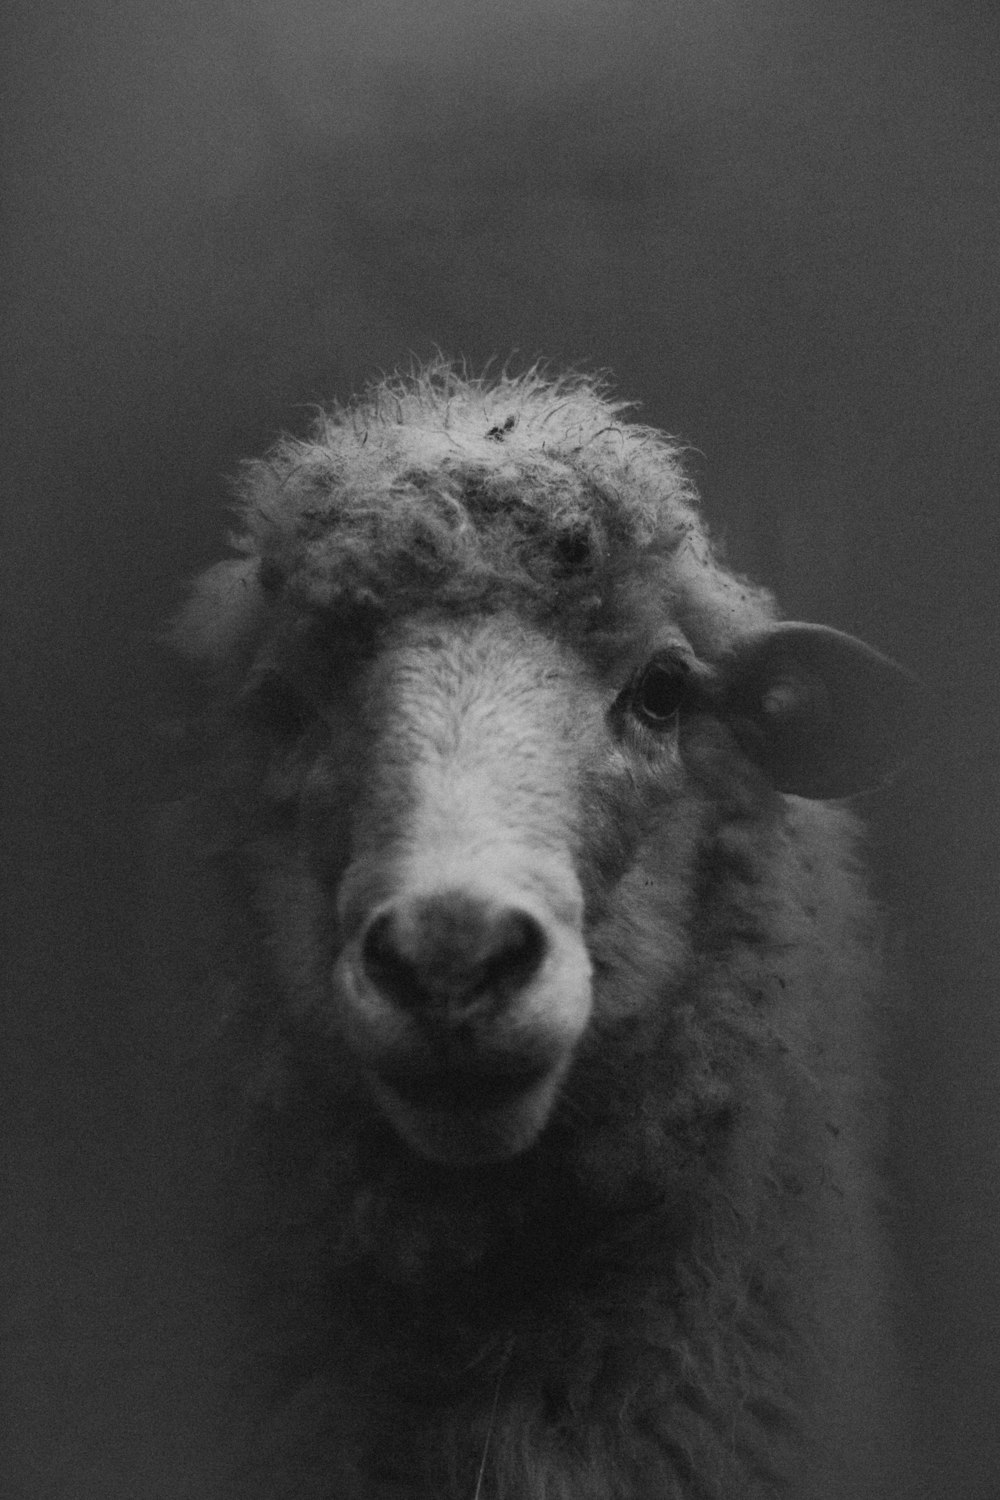 grayscale photo of sheep in a room